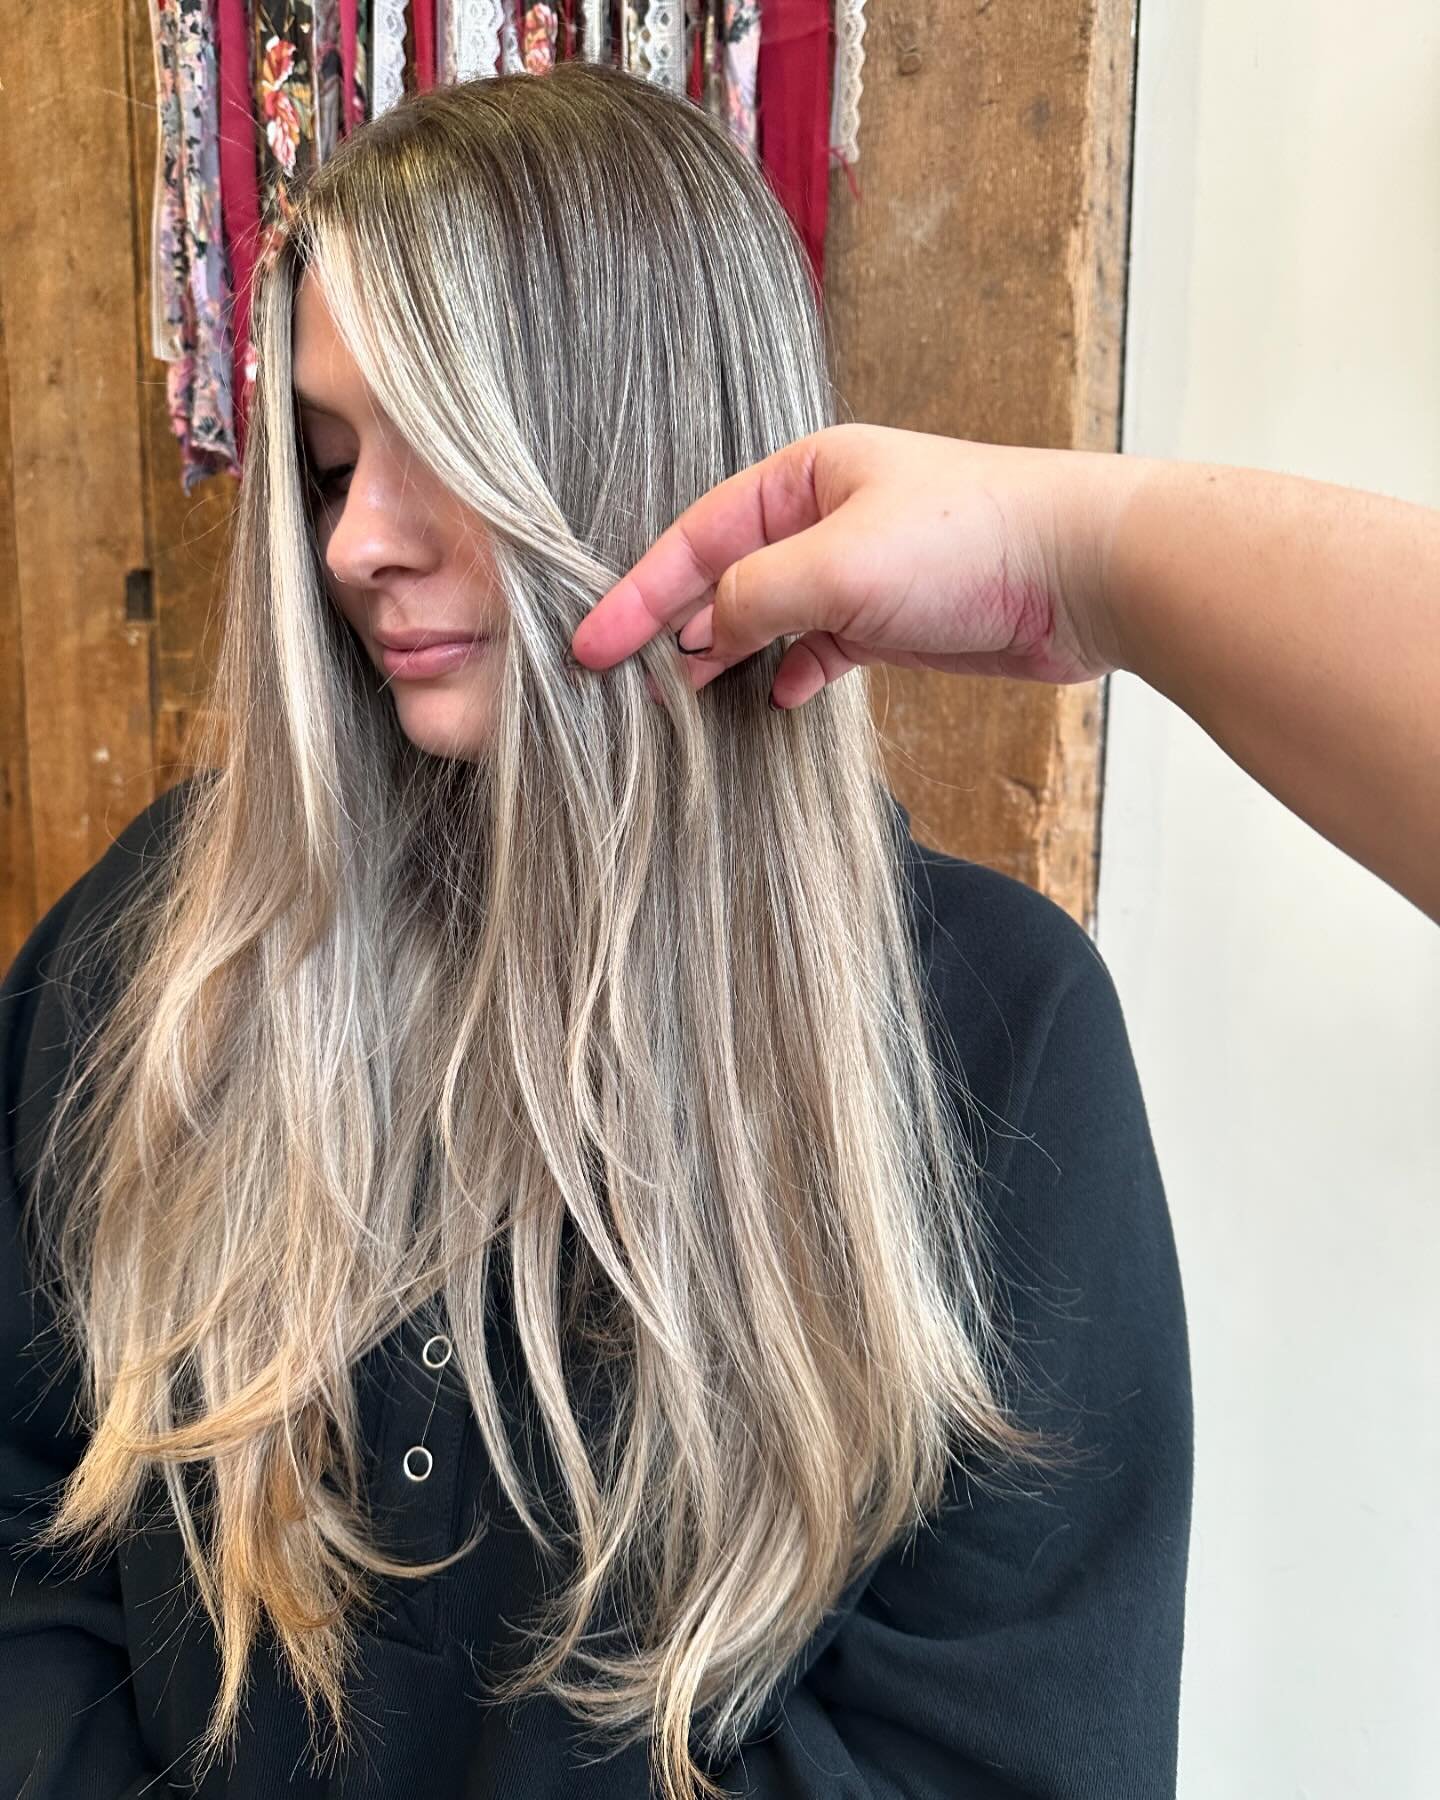 From &lsquo;lived-in blonde&rsquo; to &lsquo;life of the party&rsquo; 🌟 With the radiant glow of perfectly placed face-framing highlights, some delicate baby-lights, and cascading layers with a bouncy blowout, you can see why we say good hair days a